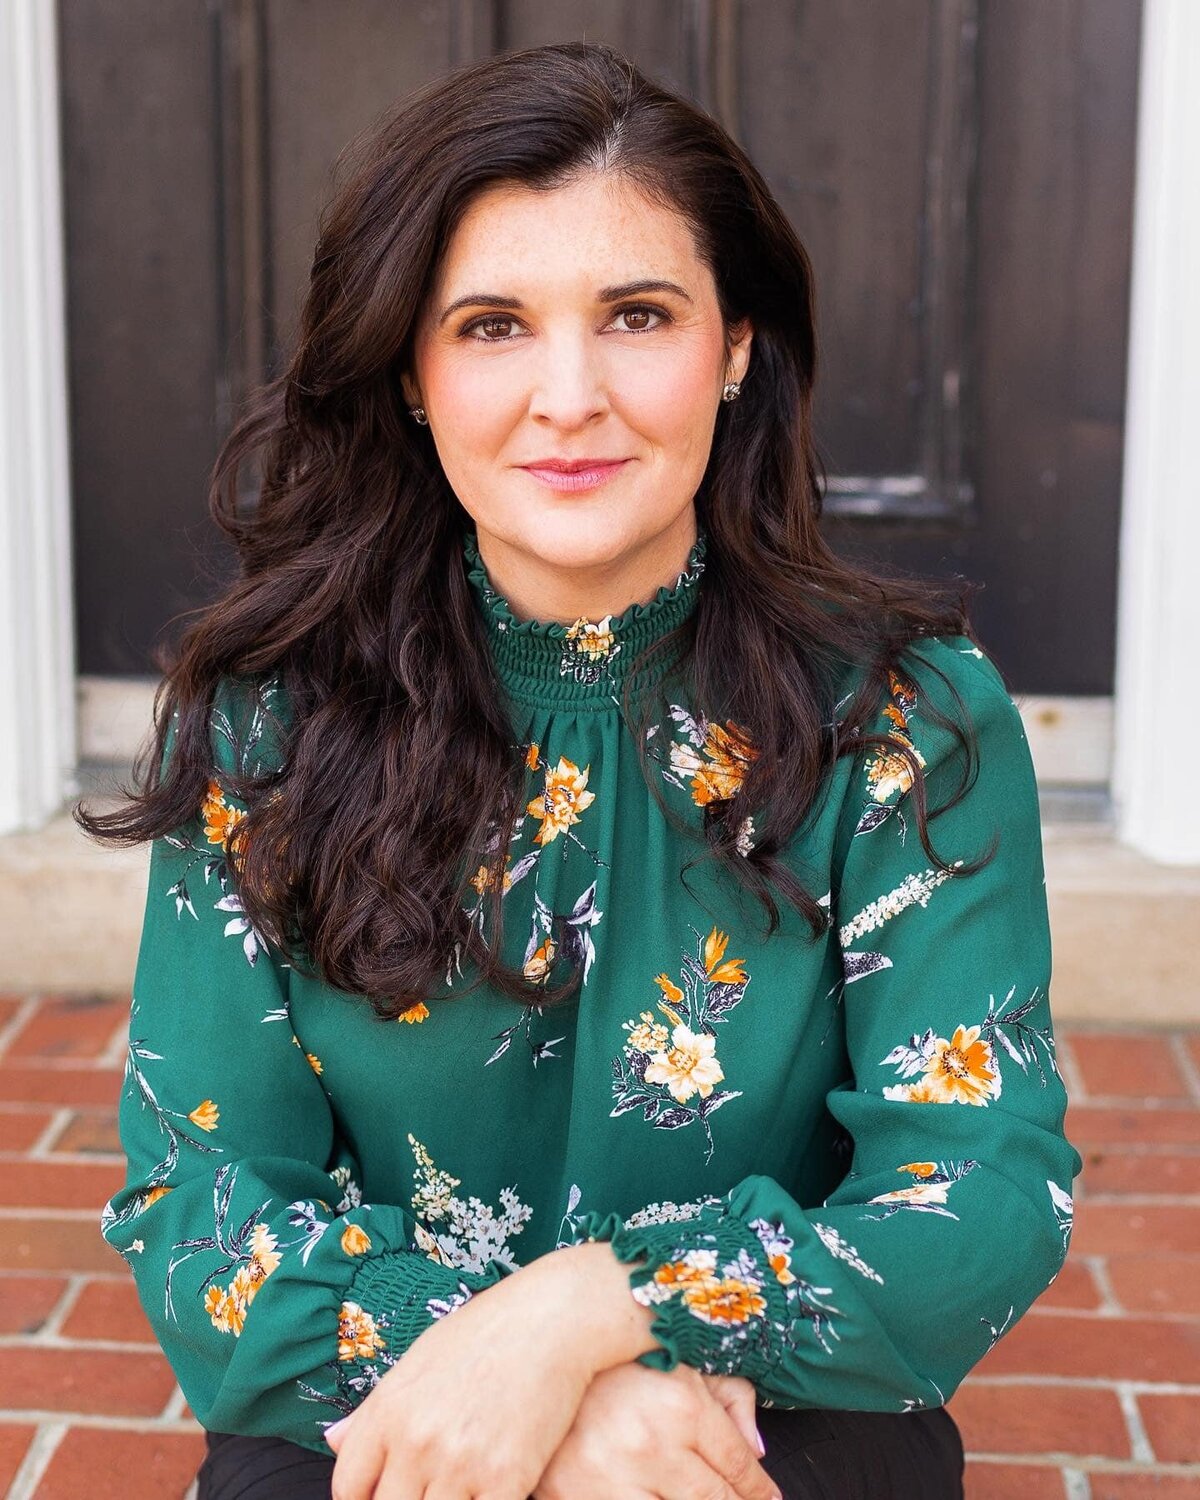 A woman with brunette hair wearing a green floral shirt sits on brick steps